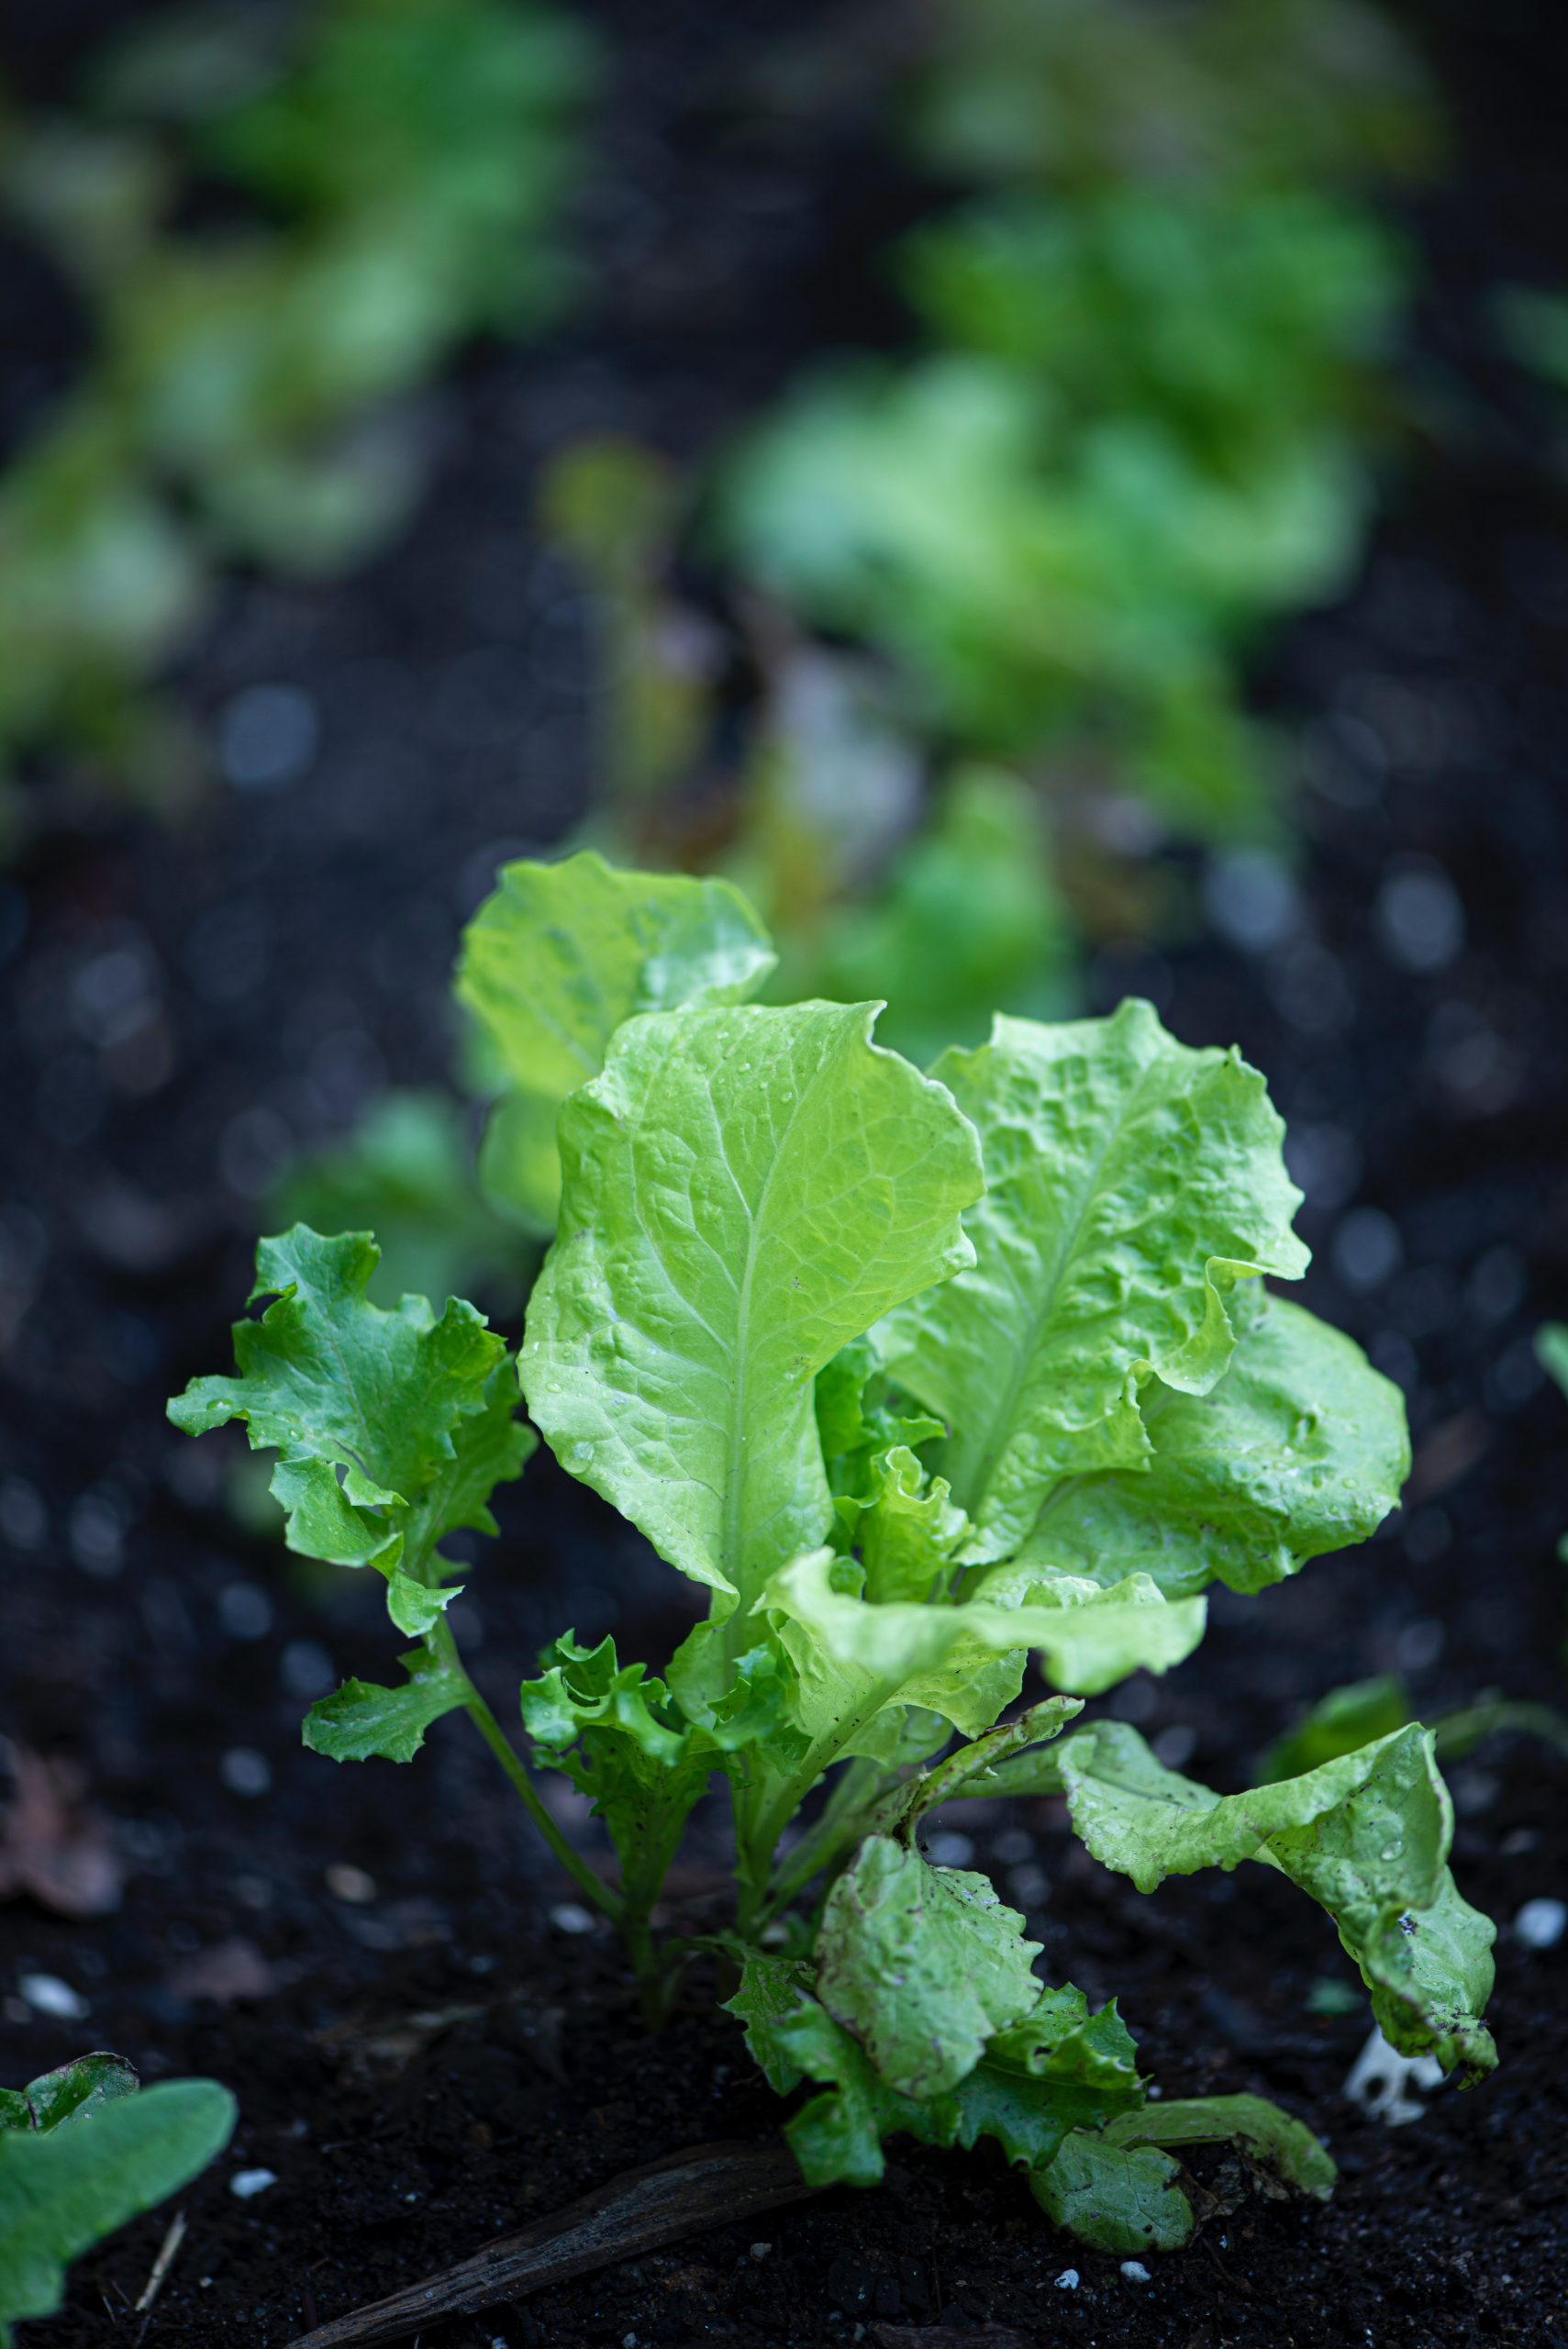 How To Harvest Lettuce Without Killing The Plant